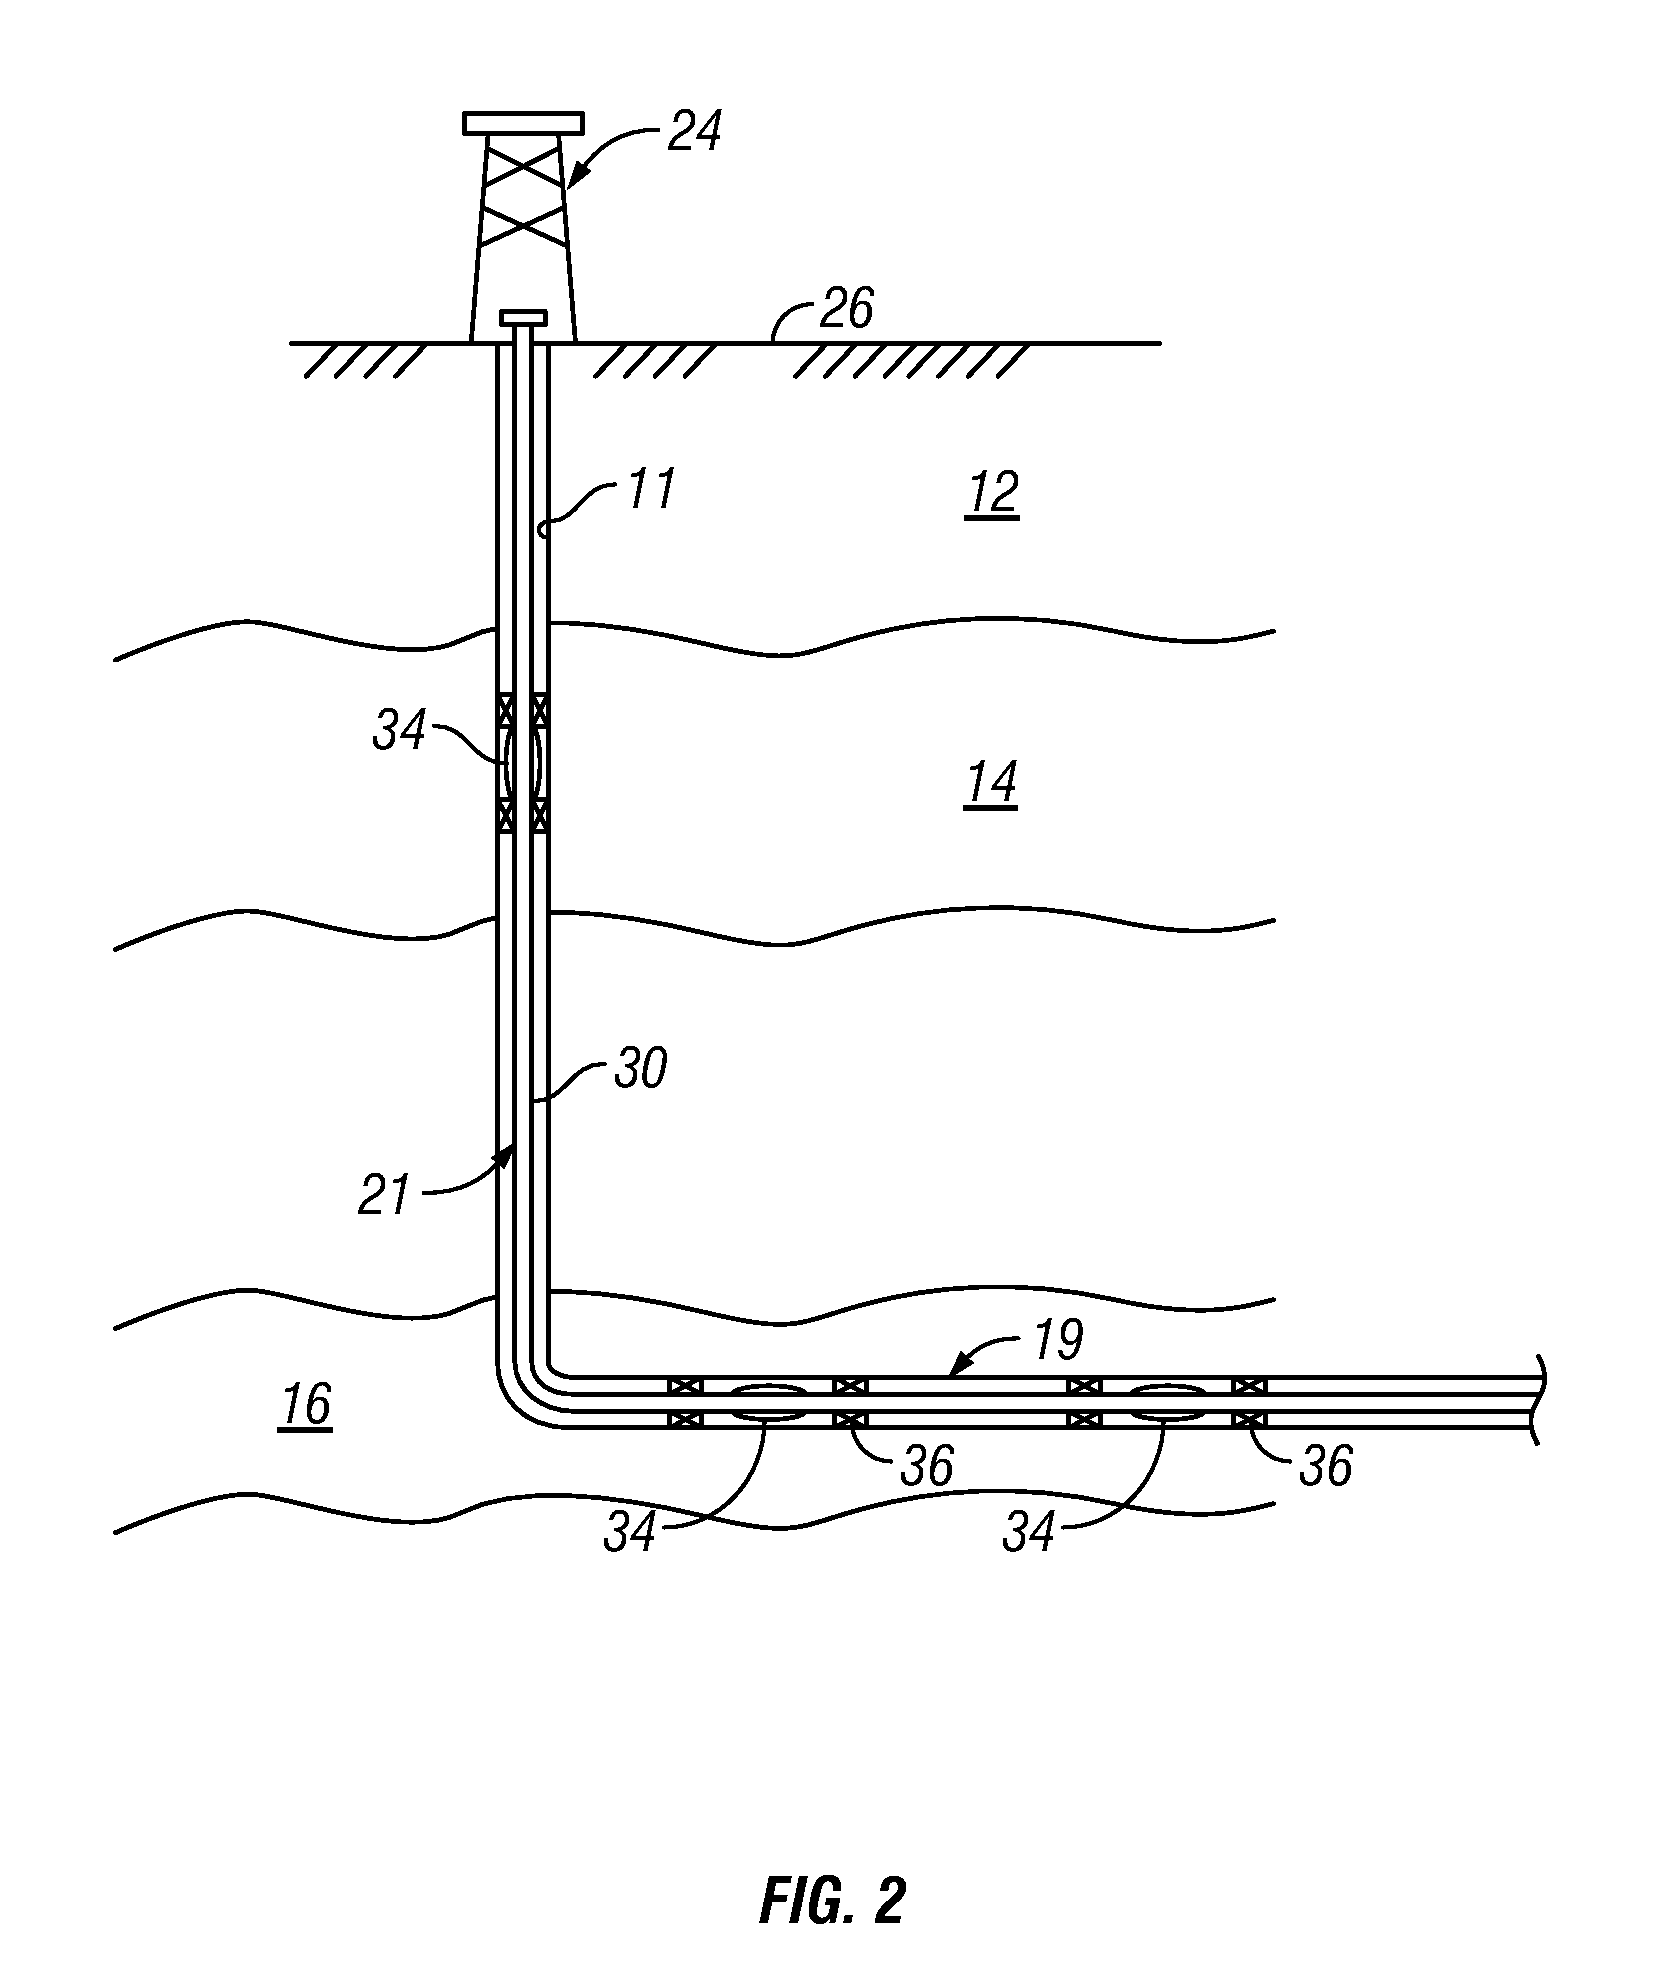 Water Sensitive Adaptive Inflow Control Using Couette Flow To Actuate A Valve